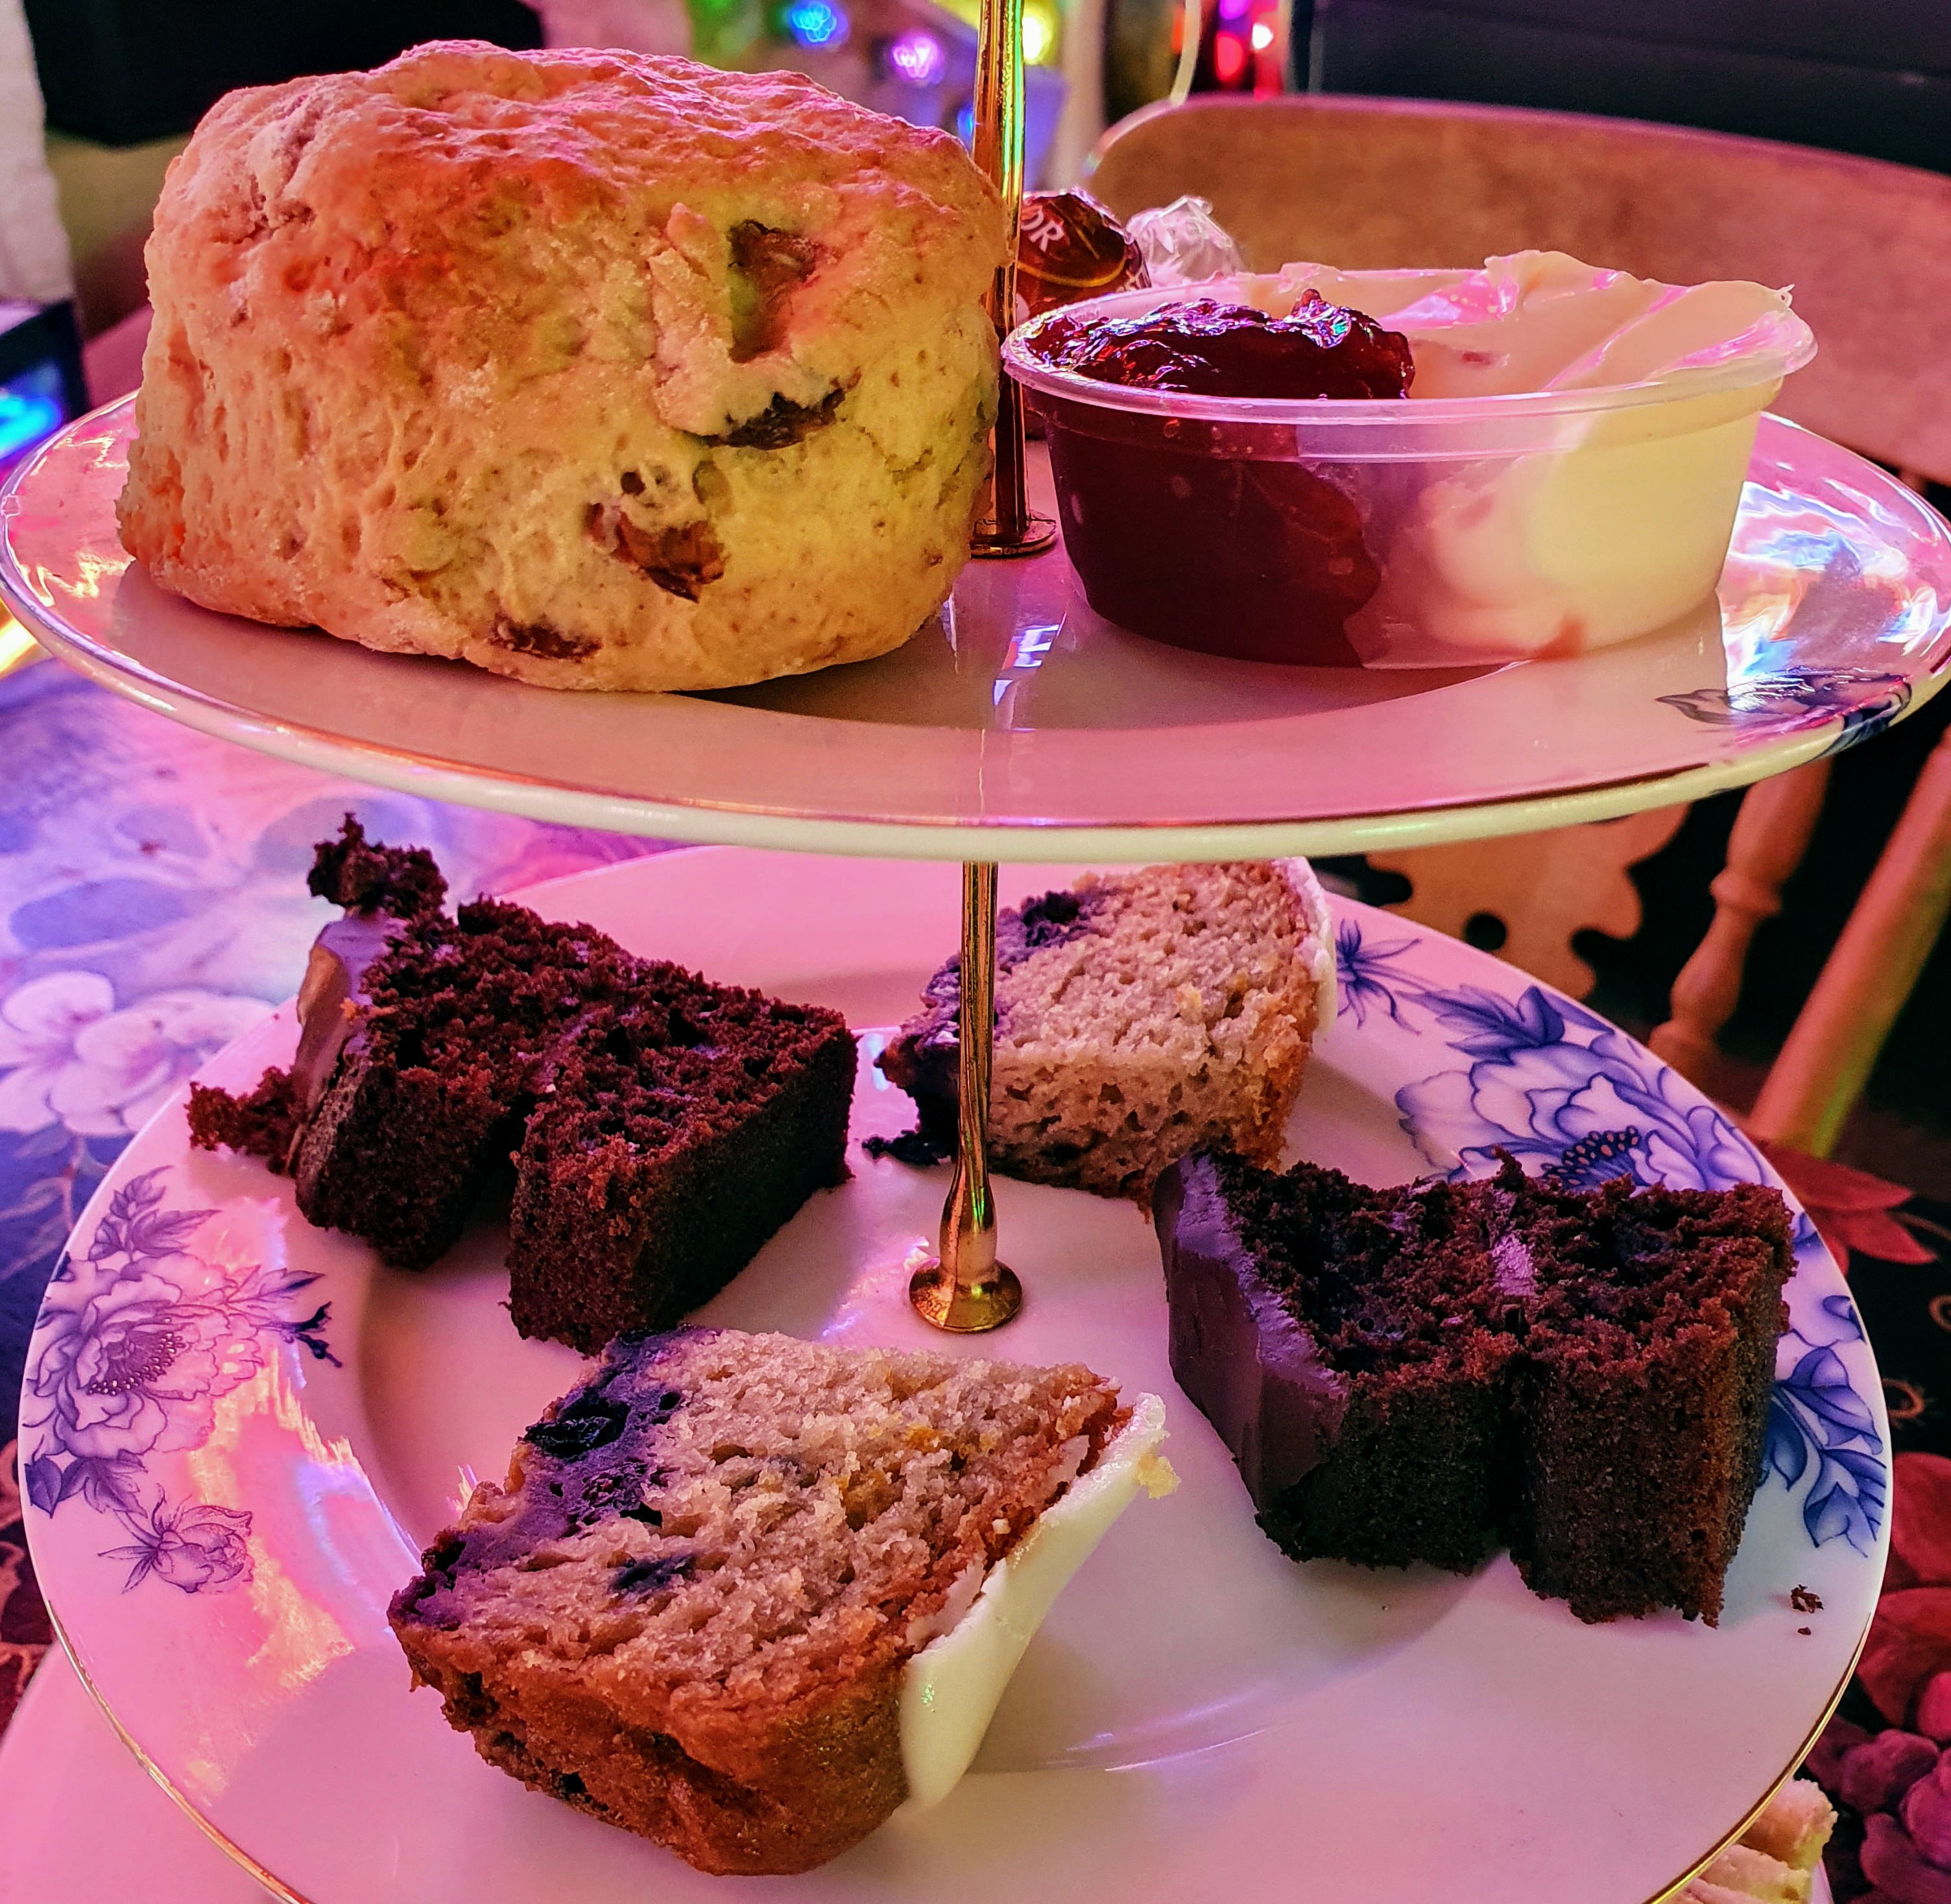 Cakes and scones with jam and cream at The Rolling Scones Café, God's Own Junkyard, Walthamstow, London